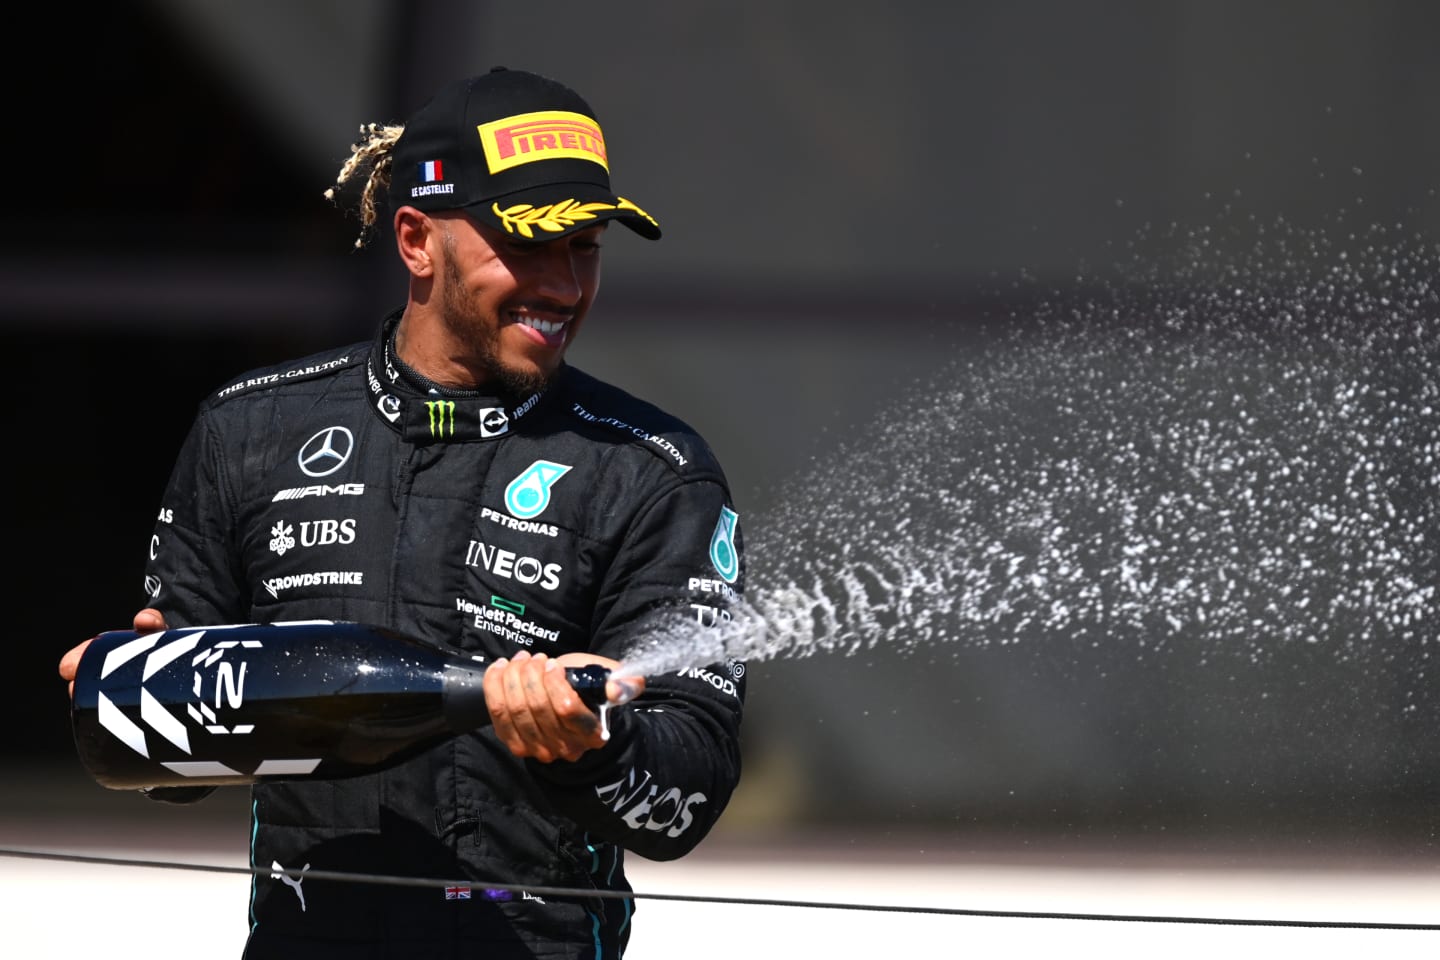 LE CASTELLET, FRANCE - JULY 24: Second placed Lewis Hamilton of Great Britain and Mercedes celebrates on the podium during the F1 Grand Prix of France at Circuit Paul Ricard on July 24, 2022 in Le Castellet, France. (Photo by Dan Mullan/Getty Images)